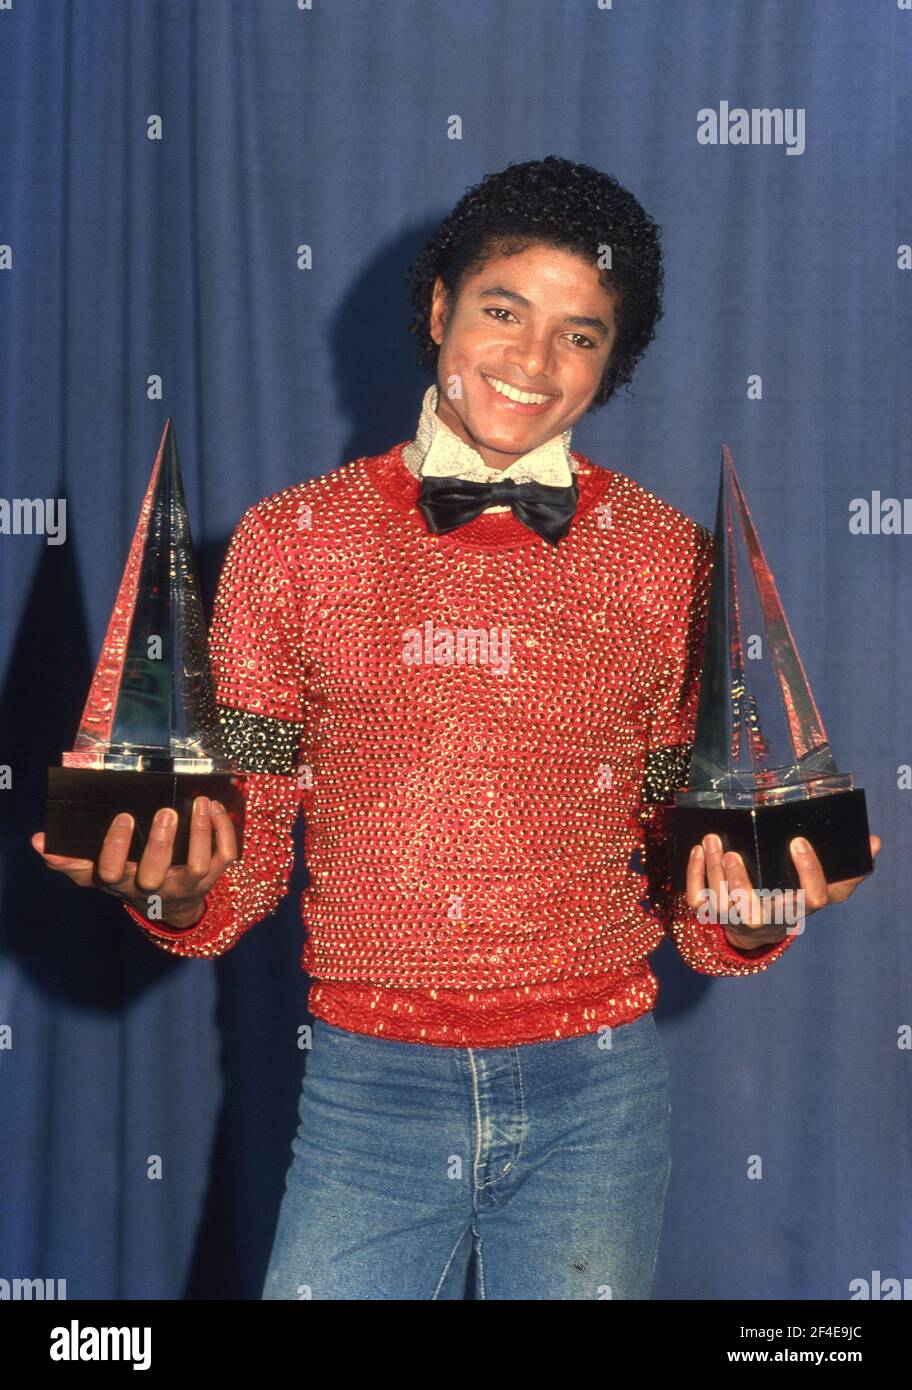 Michael Jackson carries the two American Music Awards he won for his album 'Off the Wall,' they are for Favorite Male Vocalist - Soul and R&B, and Favorite Album - Soul and R&B, Los Angeles, January 30, 1981. Credit: Ralph Dominguez/MediaPunch Stock Photo